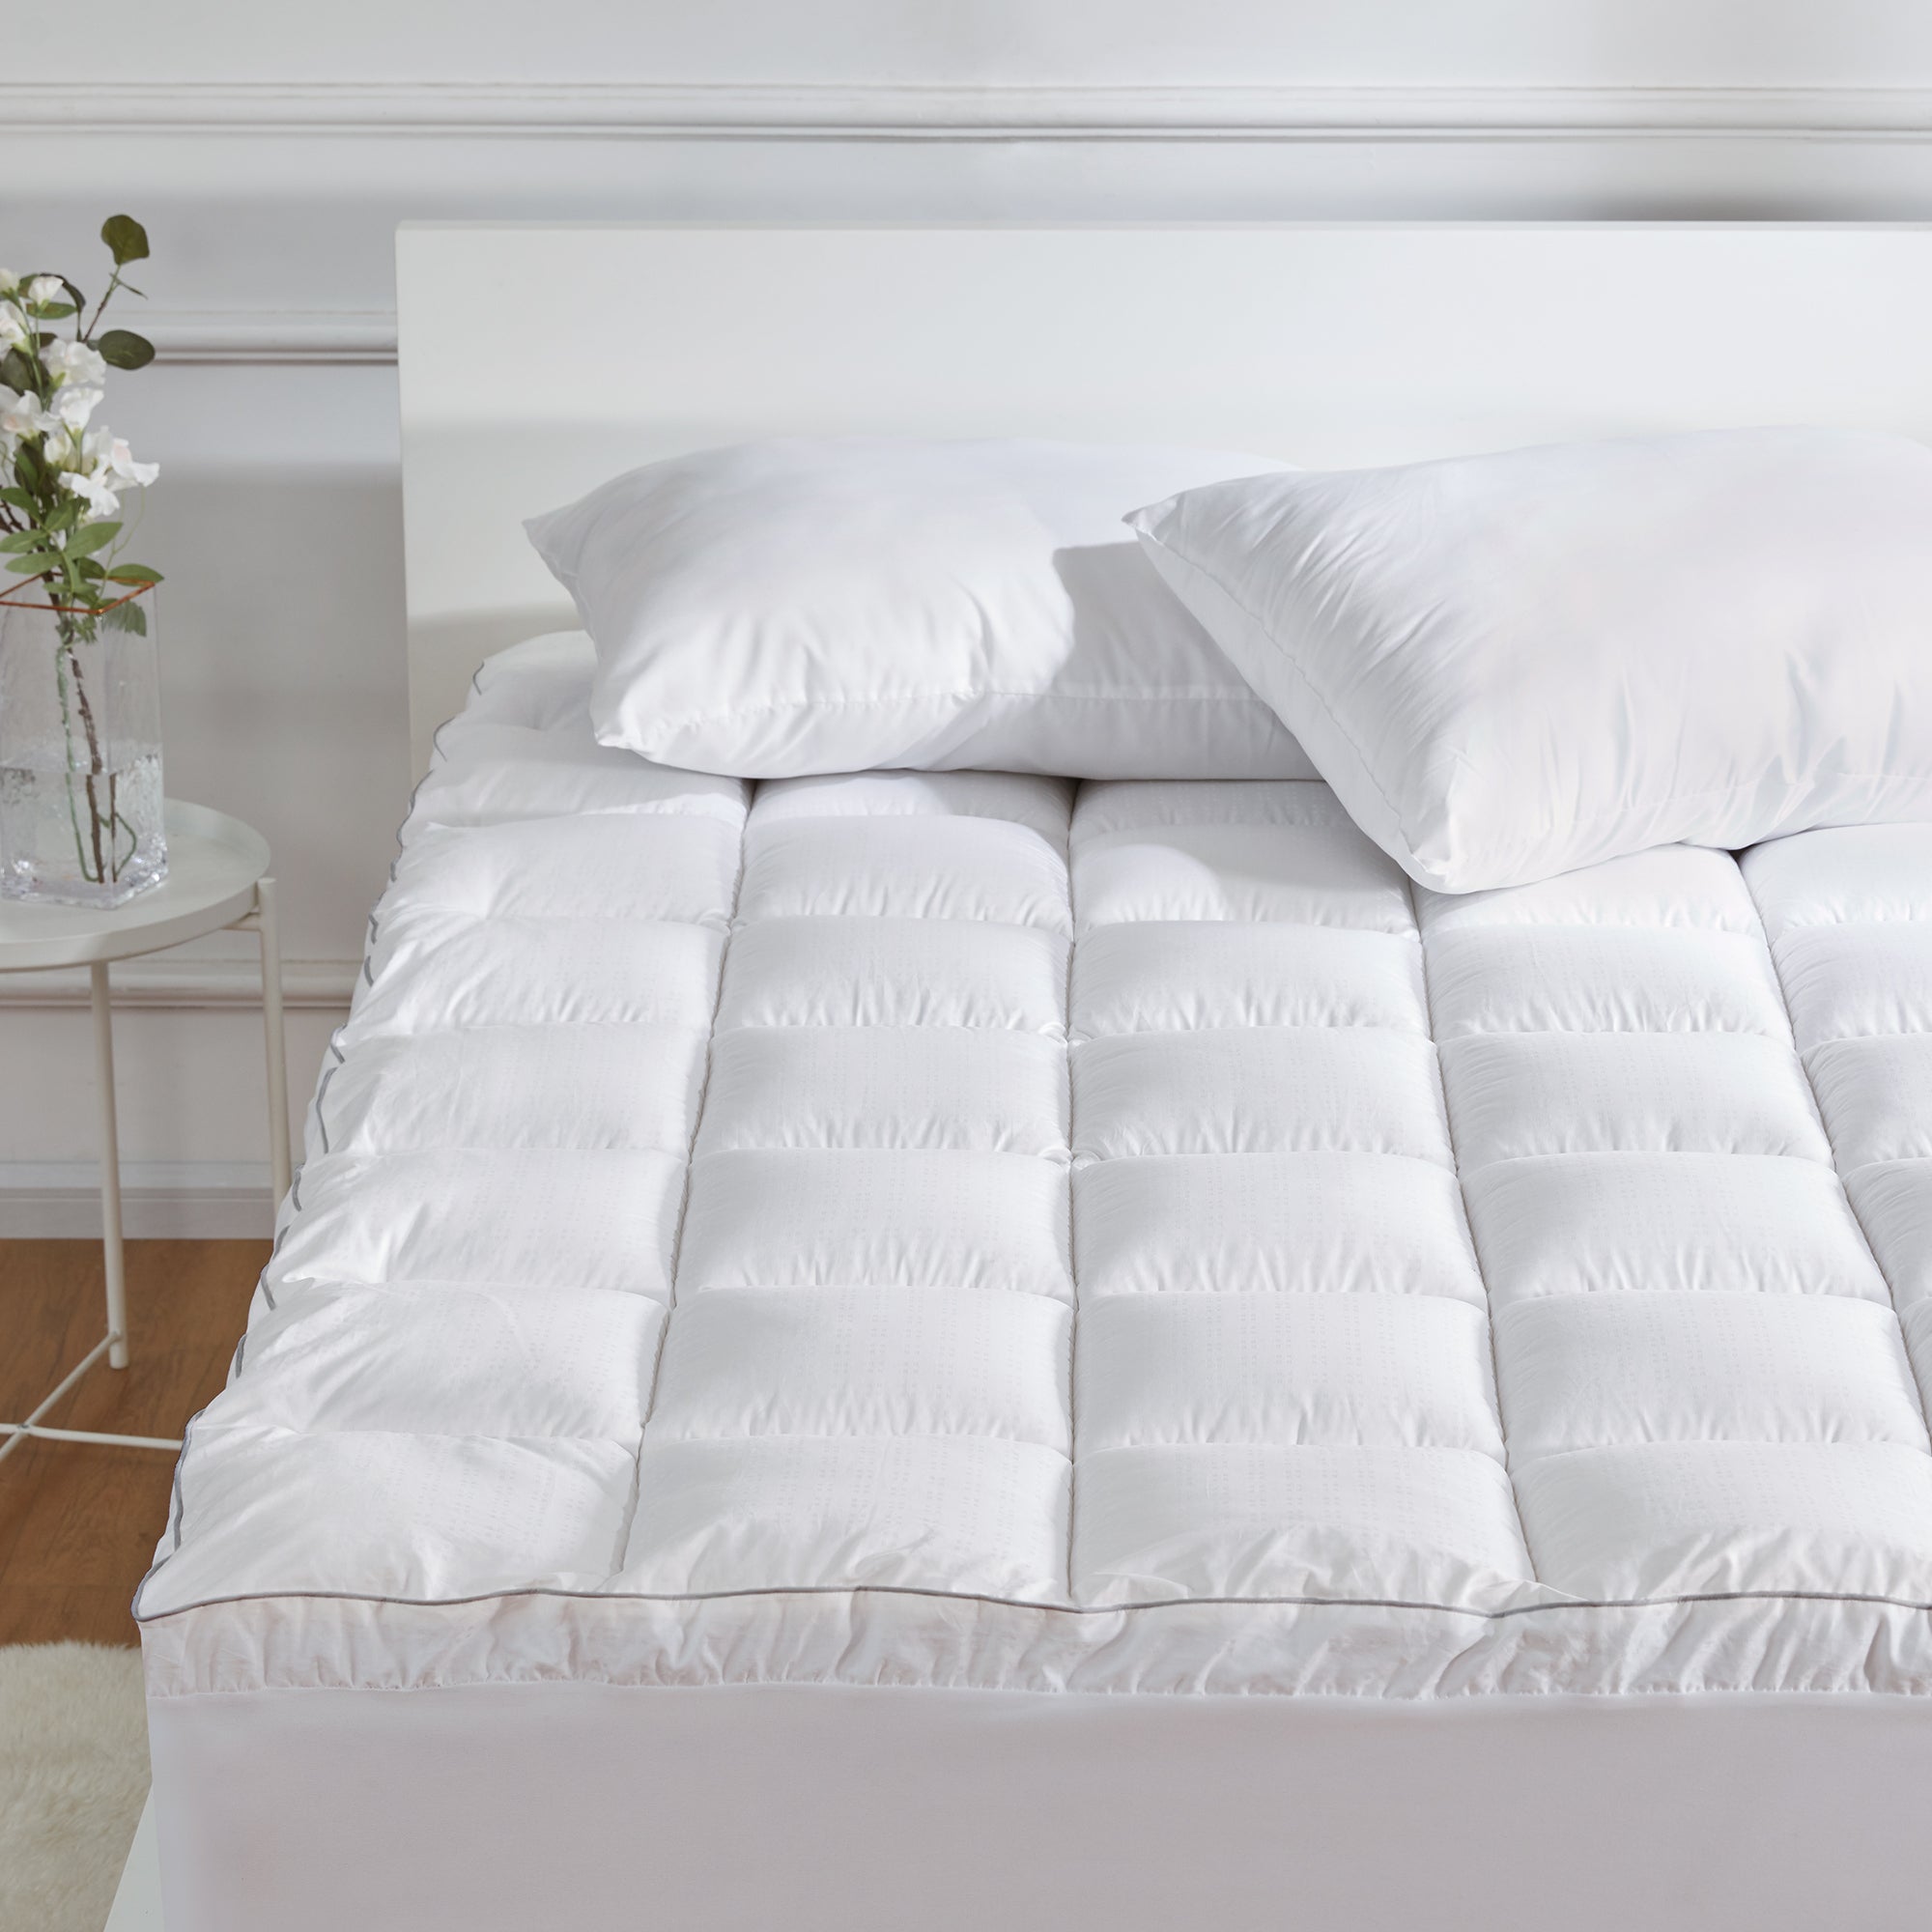 sleep zone bedding luxury extreme thick cotton mattress pad white bedroom sunshine full queen king